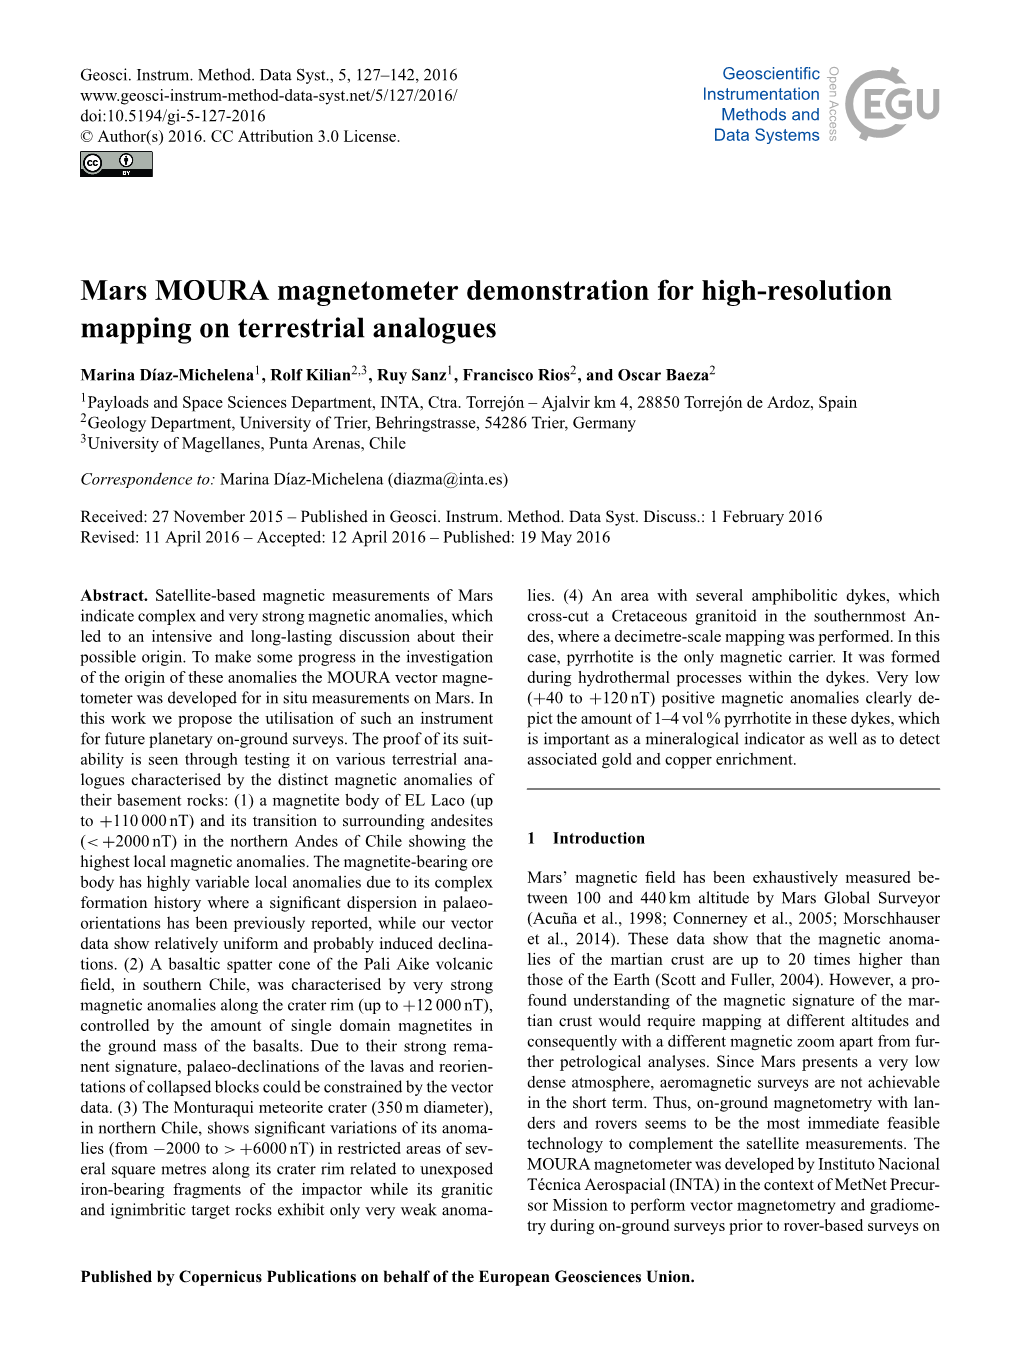 Mars MOURA Magnetometer Demonstration for High-Resolution Mapping on Terrestrial Analogues